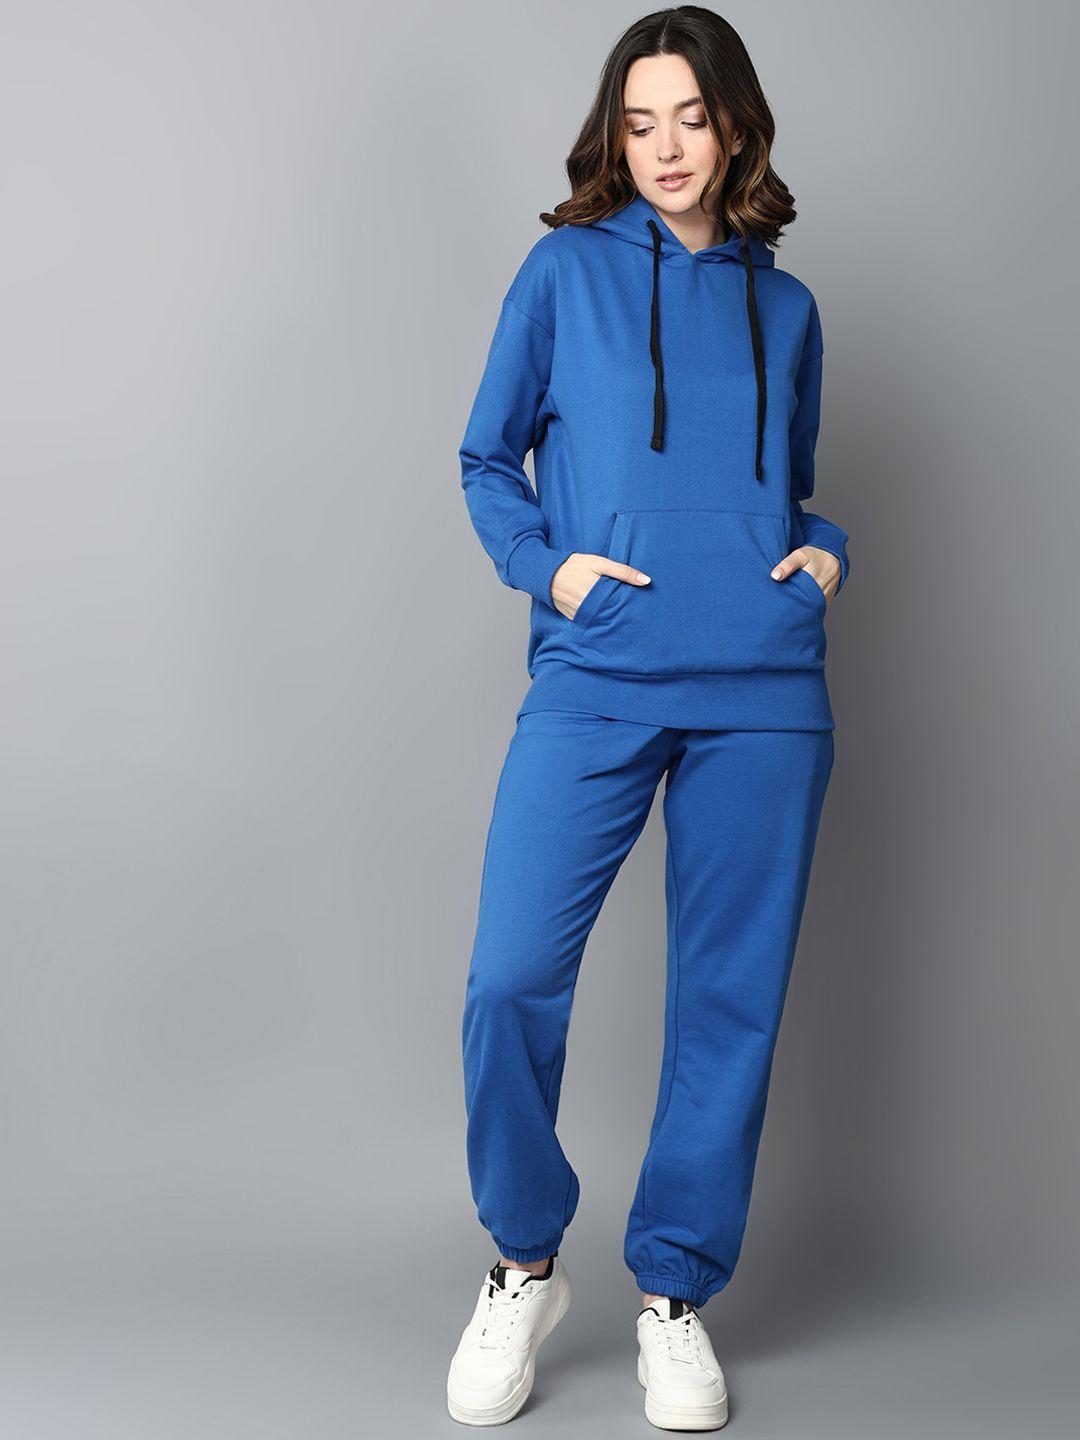 the roadster lifestyle co. blue typography printed hooded tracksuit